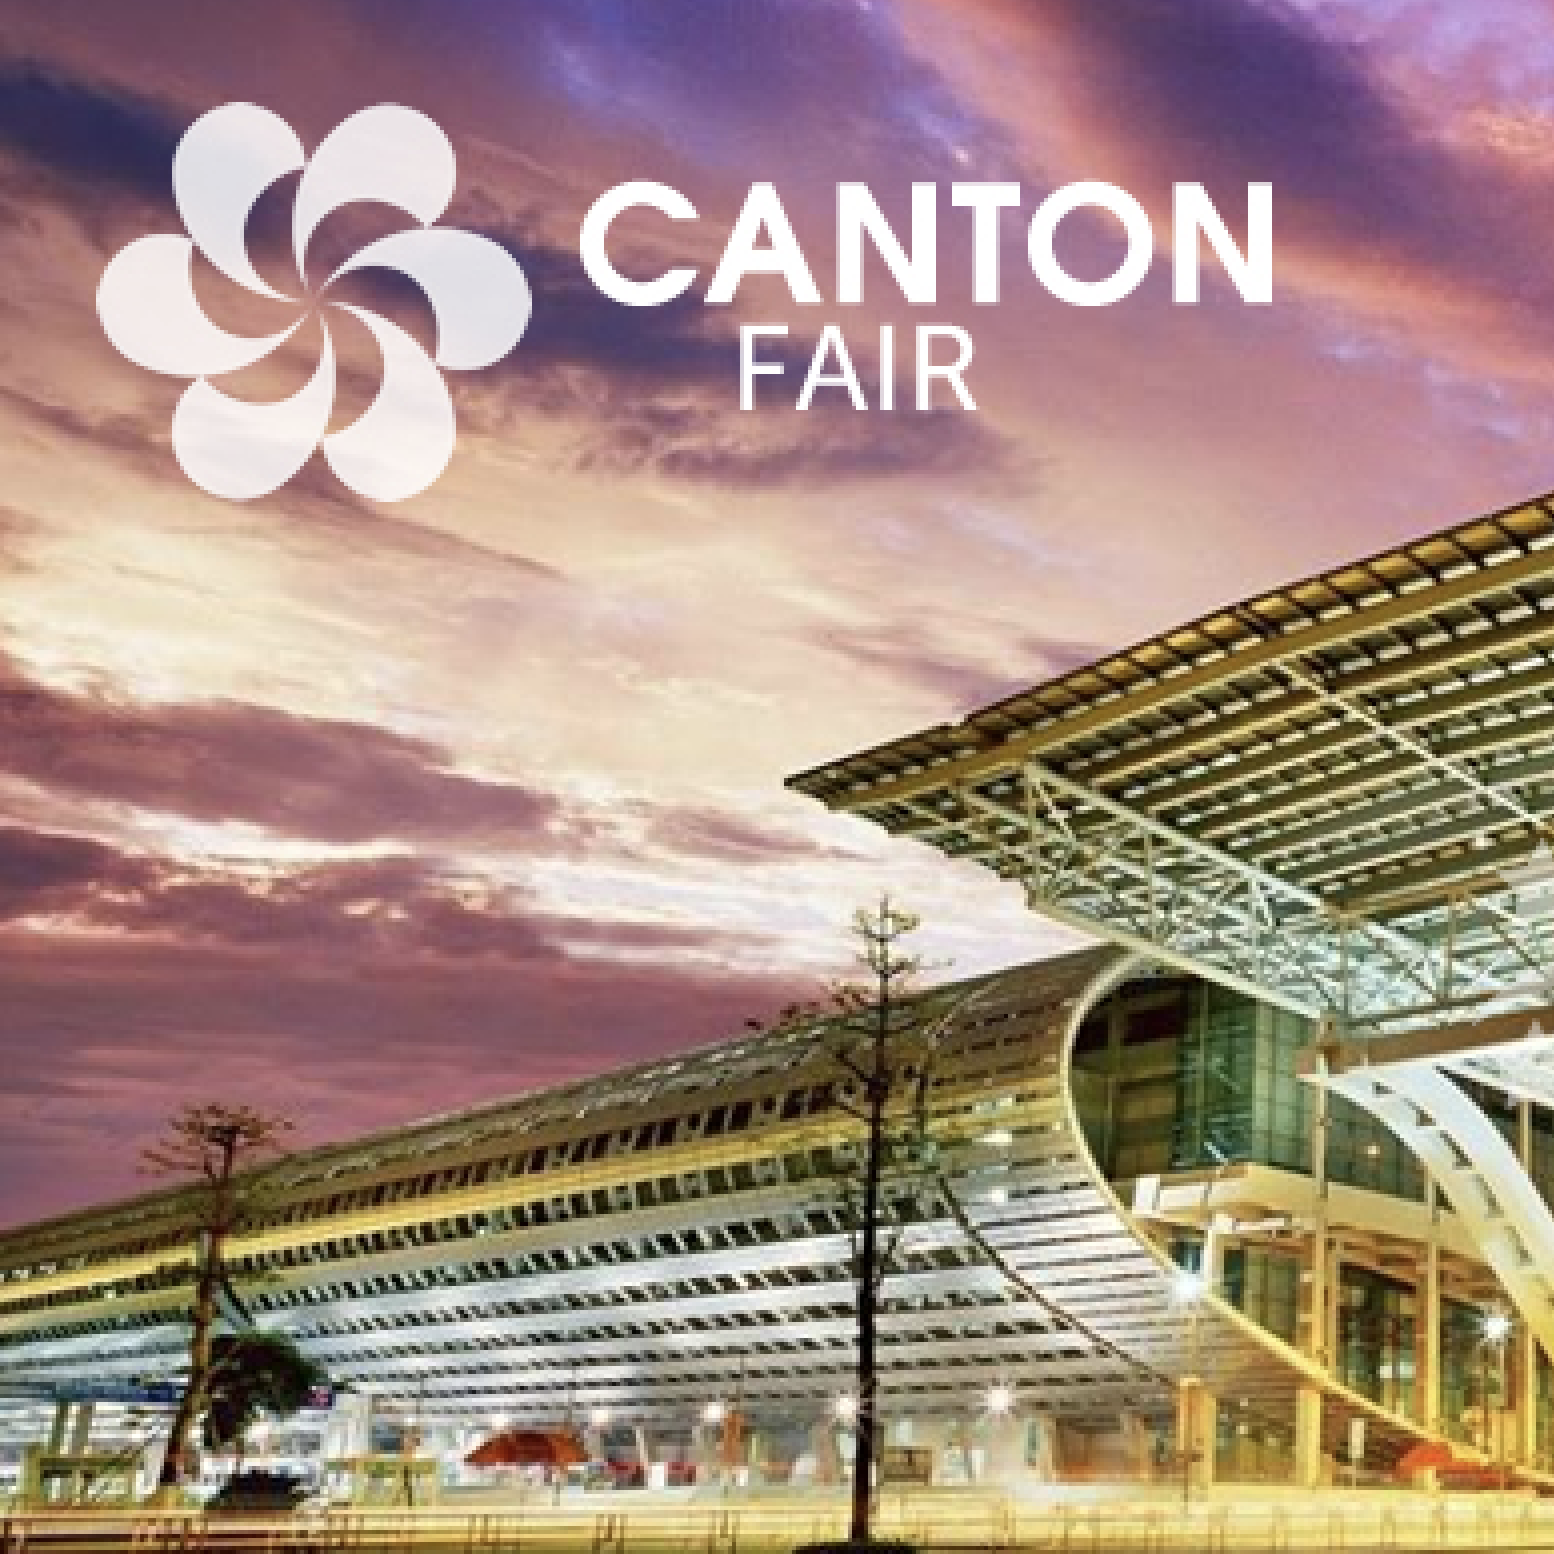 Welcome to Participte in the 134th Canton Fair